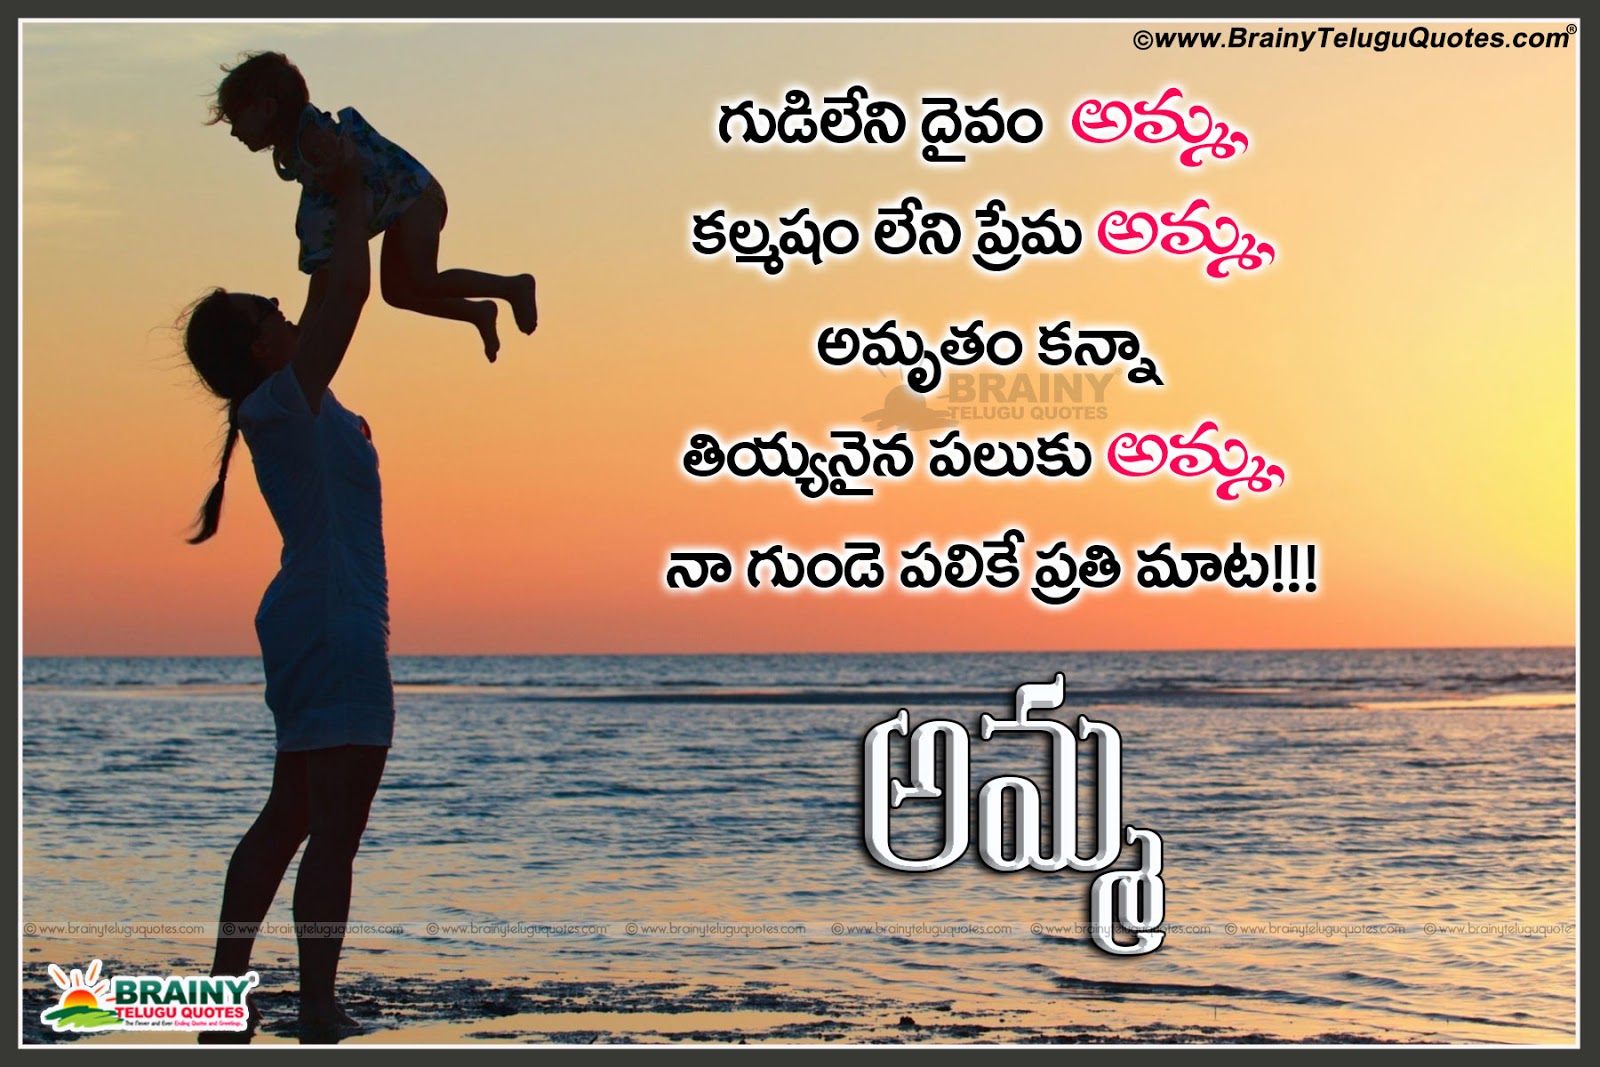 Here is a Top Telugu Amma Quotes and kavithalu Best Telugu Quotations on Mother